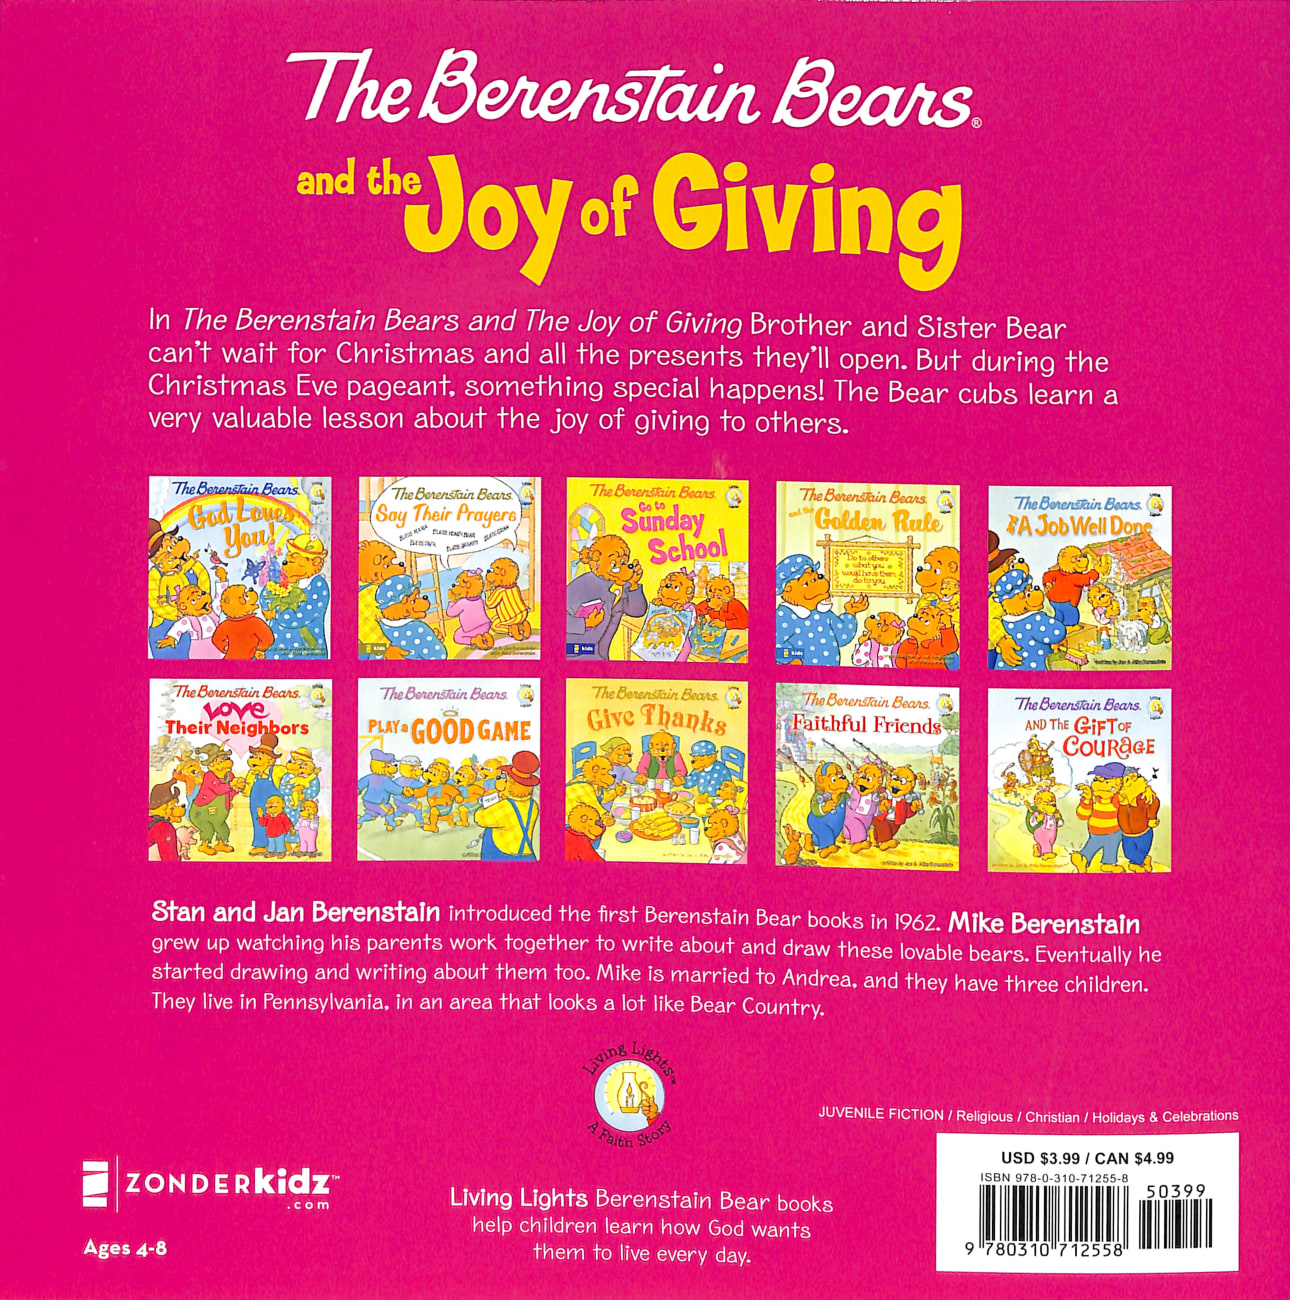 The Joy of Giving (The Berenstain Bears Series) Paperback